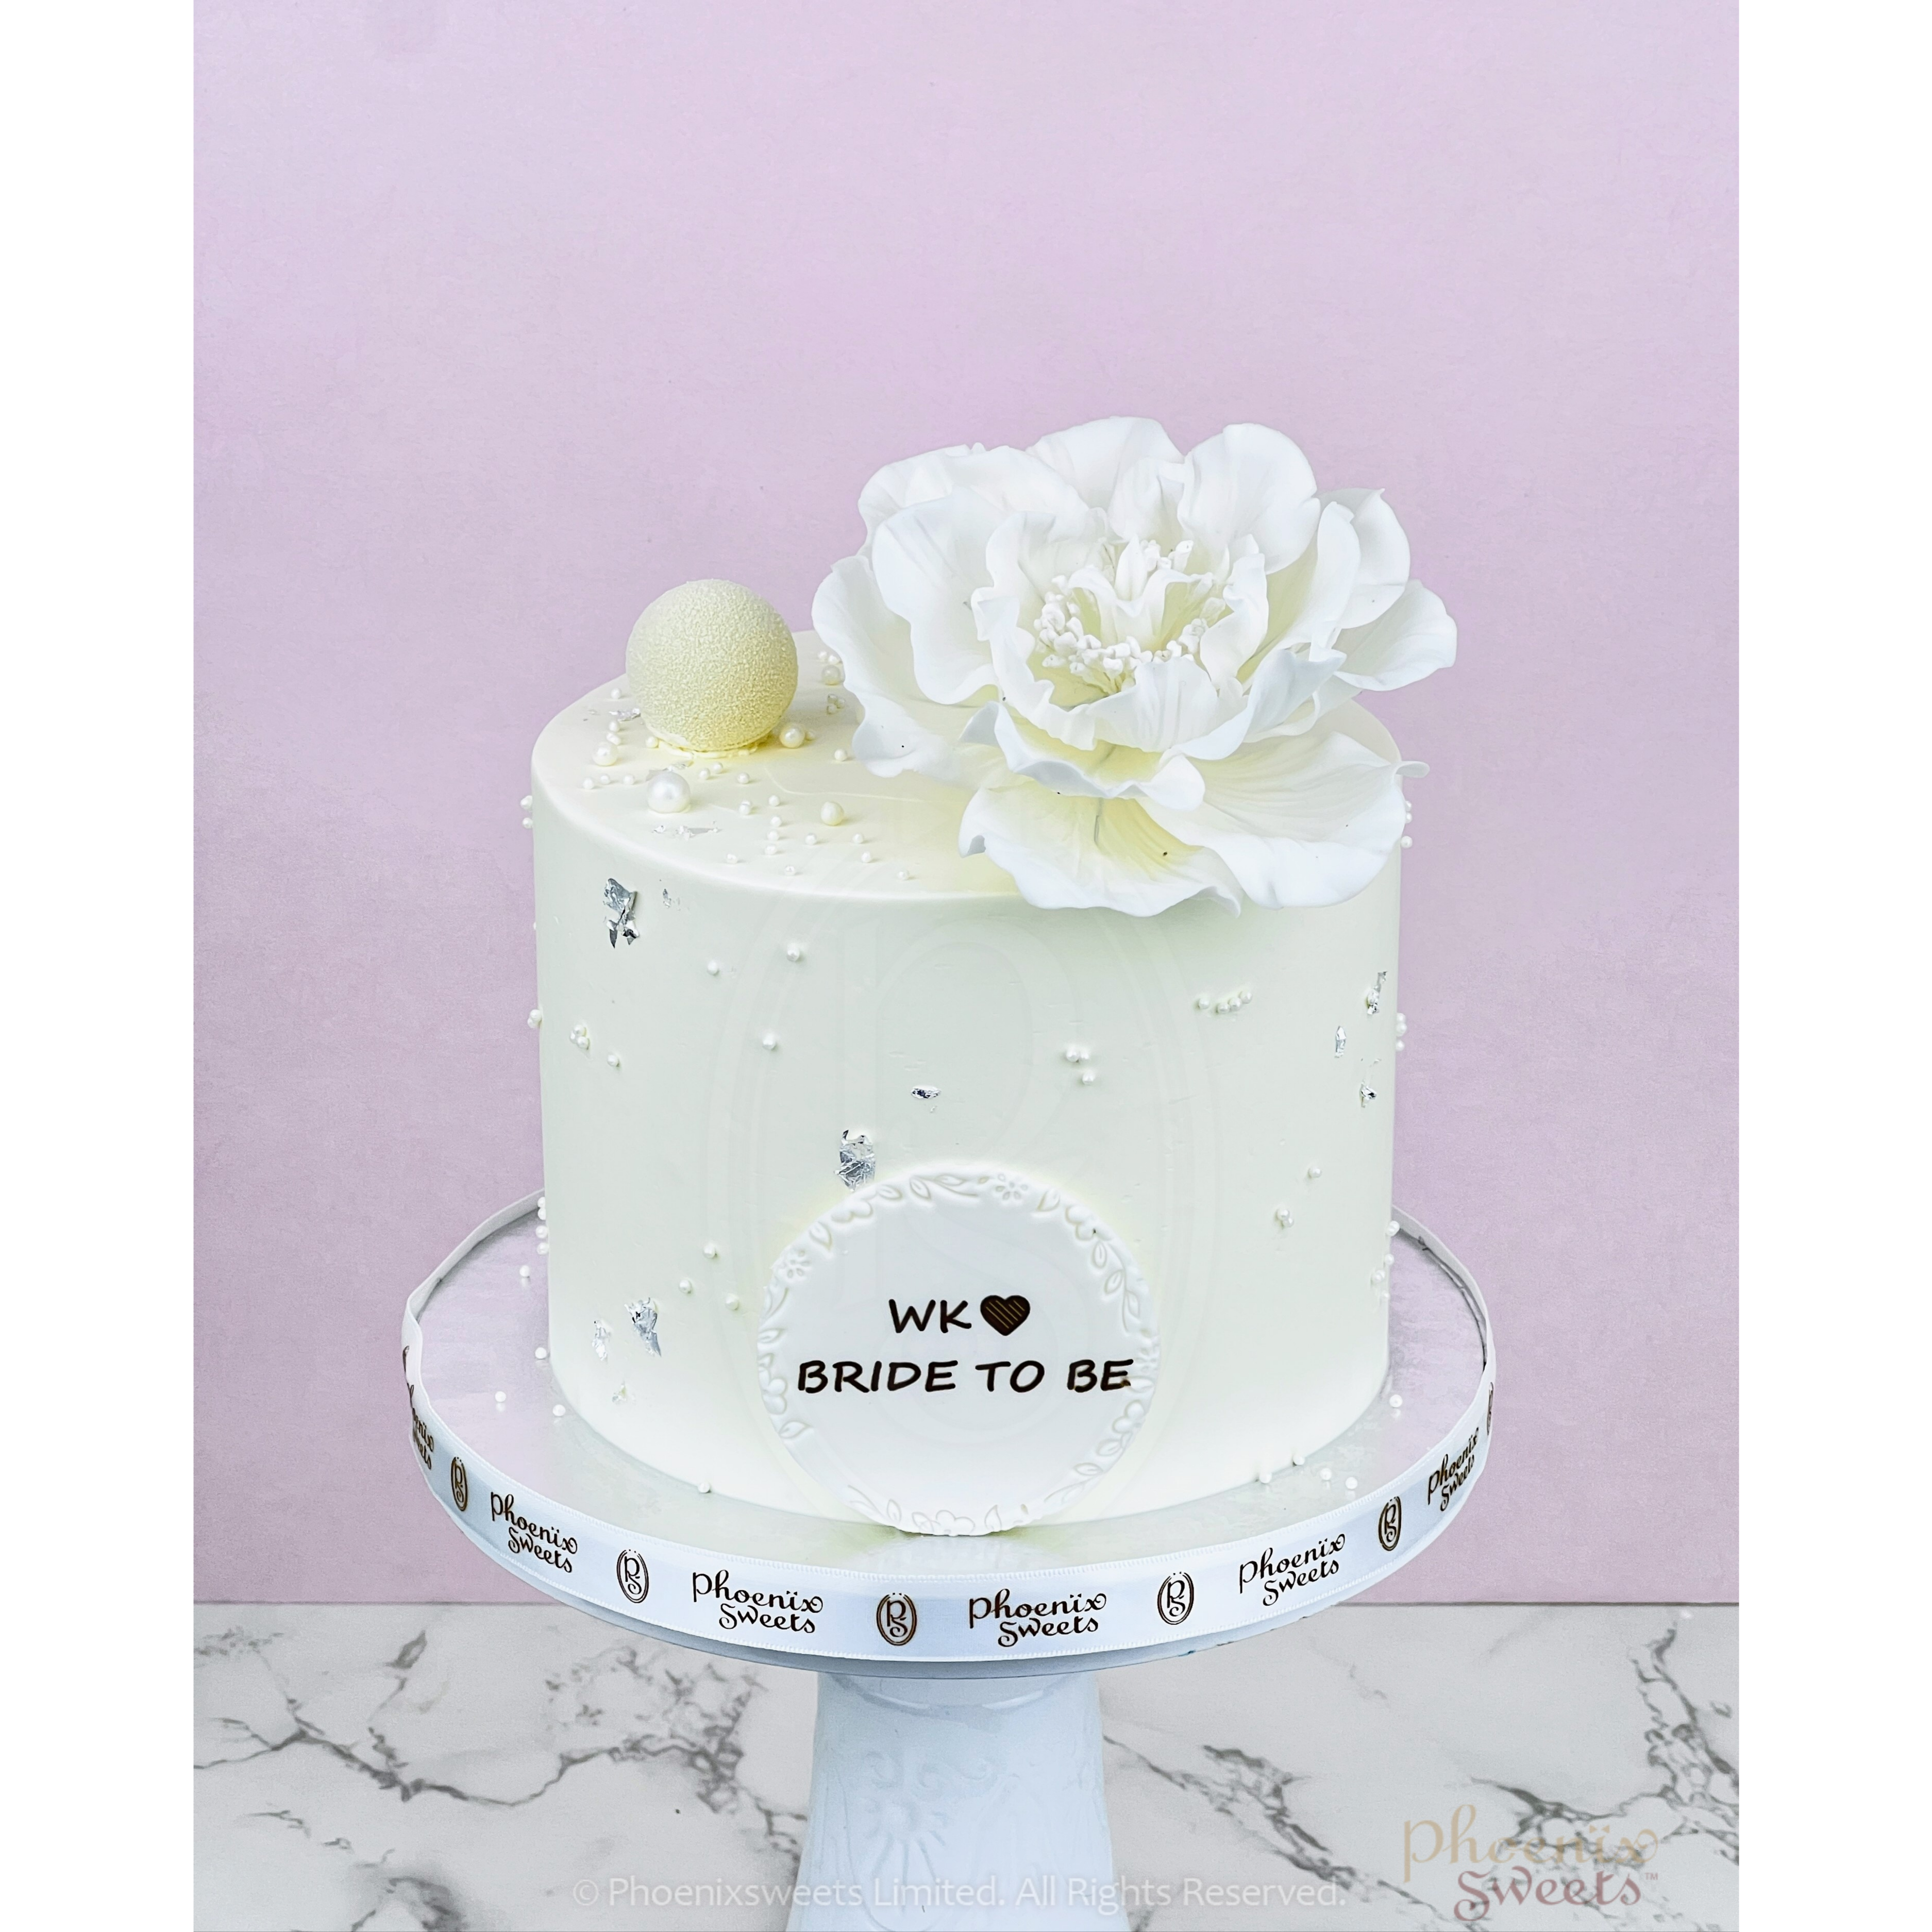 Cake　Cream　Phoenix　Sweets　Butter　Standard　Order　Pearl　Peony　with